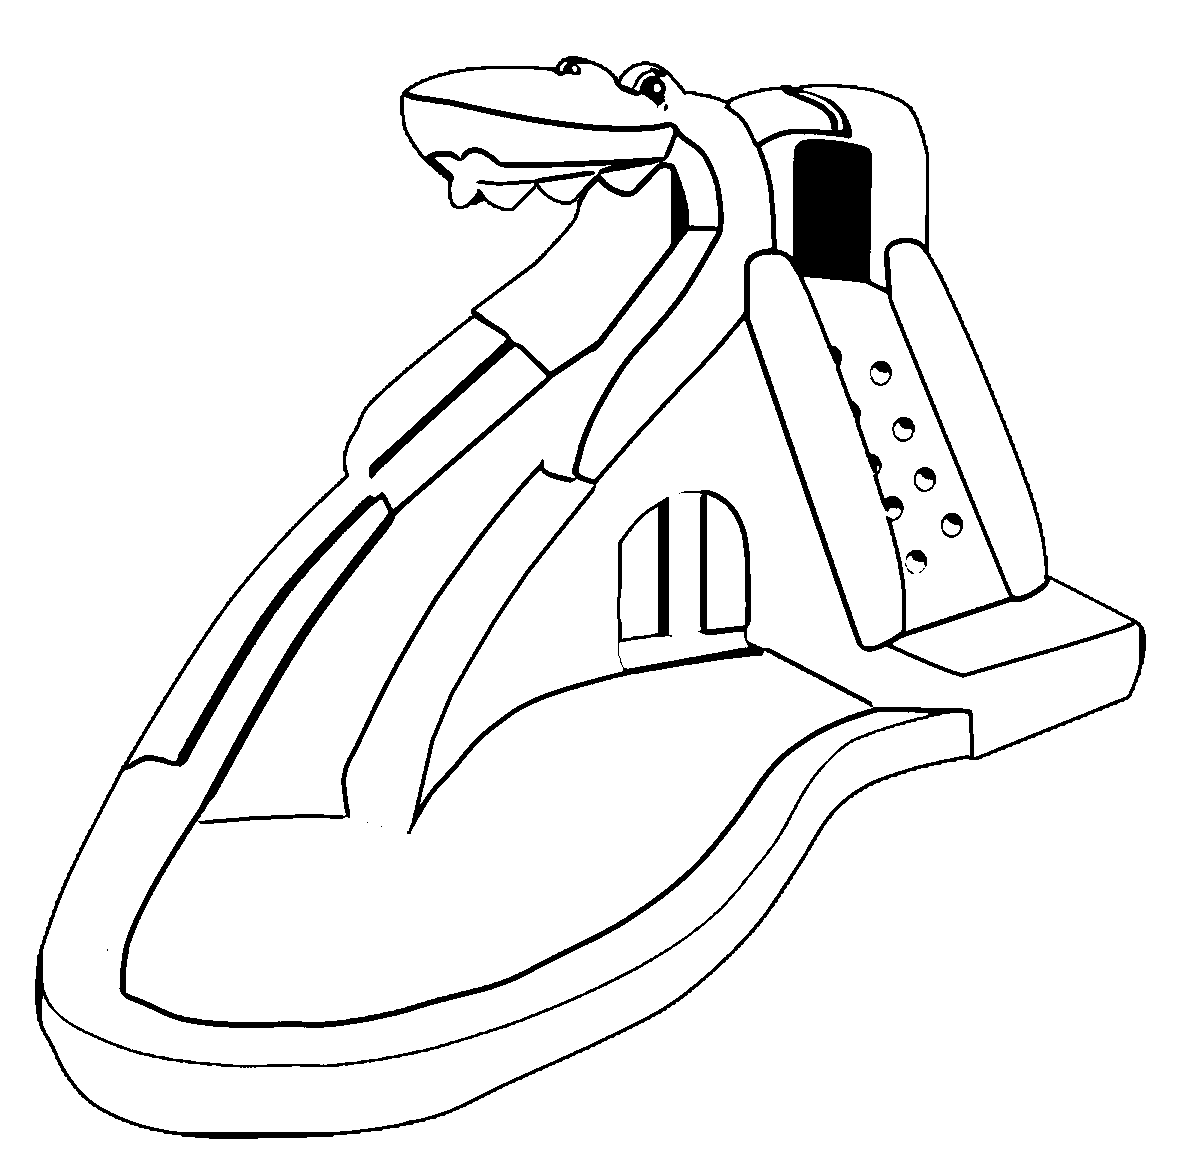 Amusement Water Slide Coloring Page | Wecoloringpage